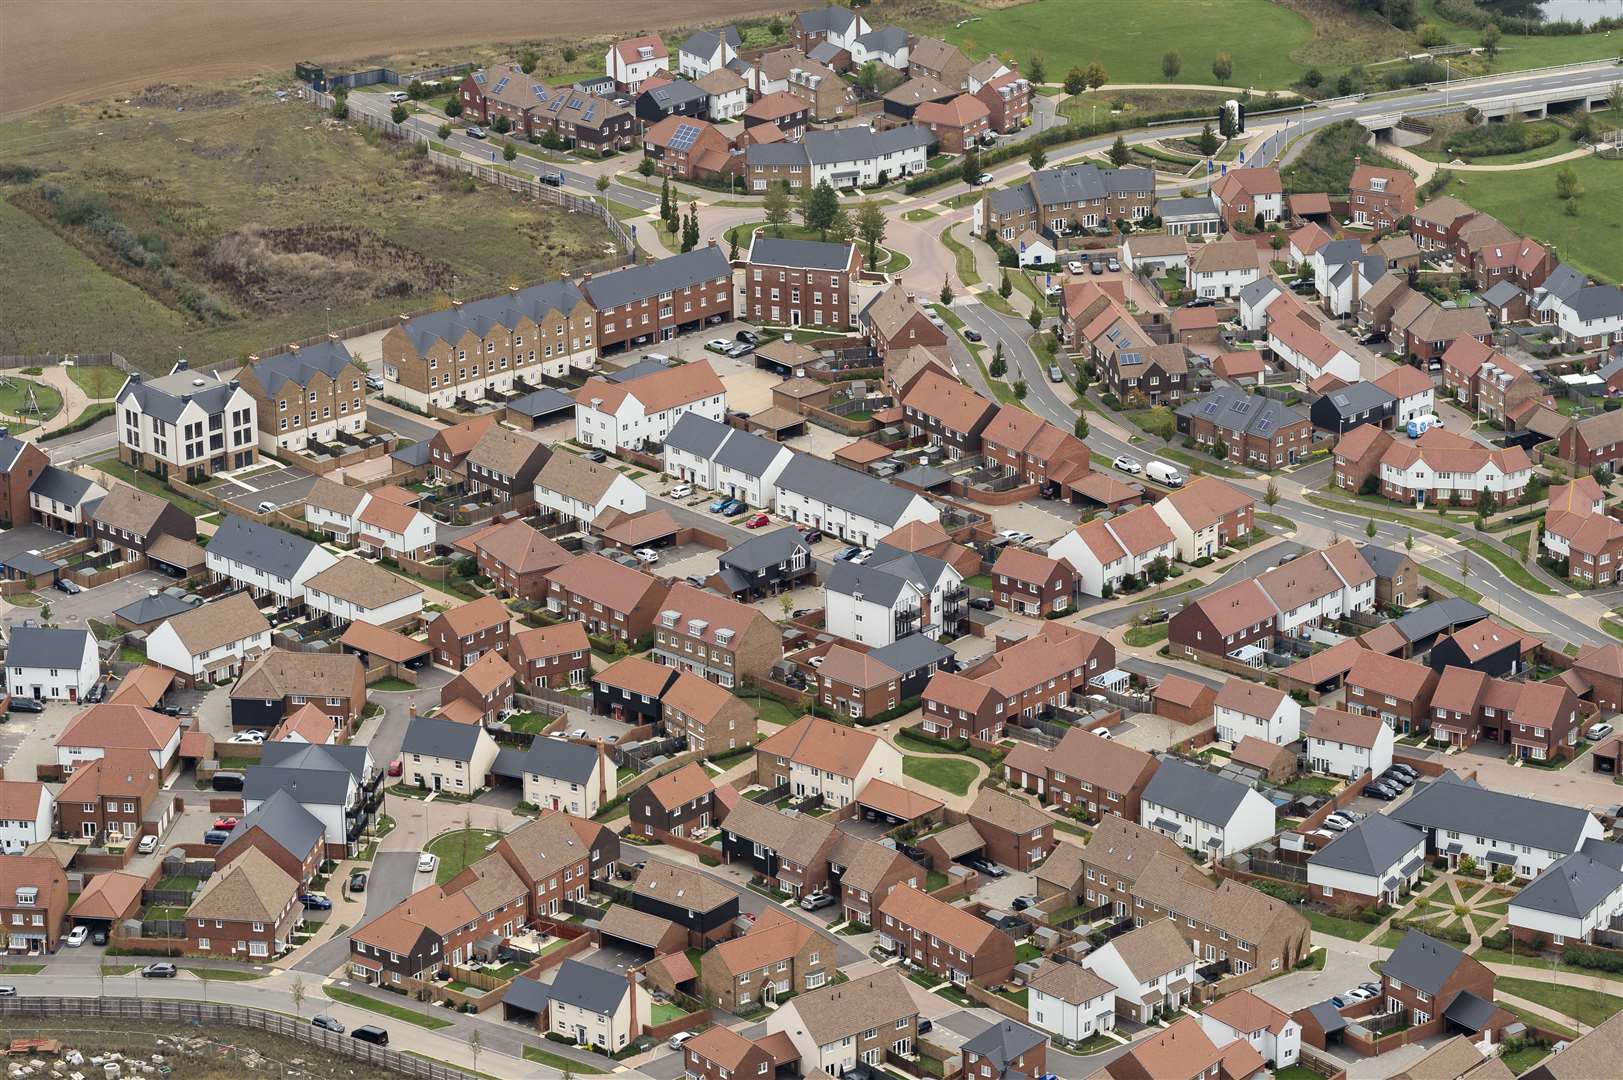 The new-build Finberry estate pictured in 2020. Picture: Ady Kerry/Ashford Borough Council